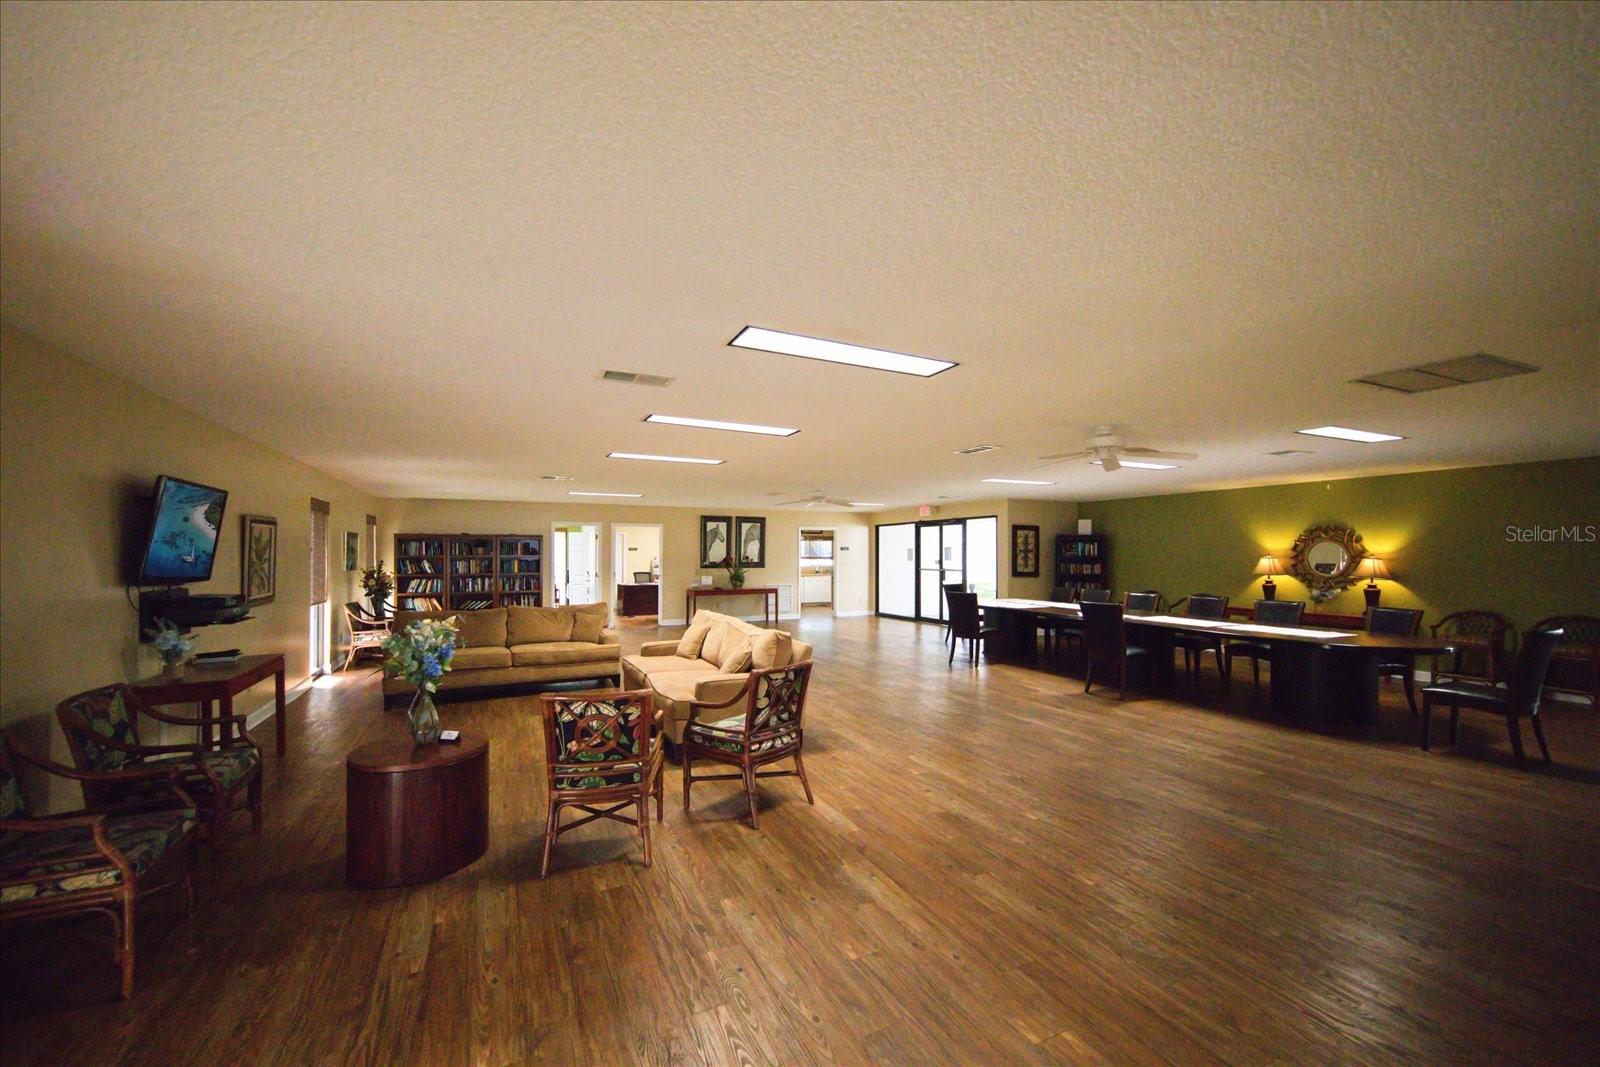 Interior of Clubhouse